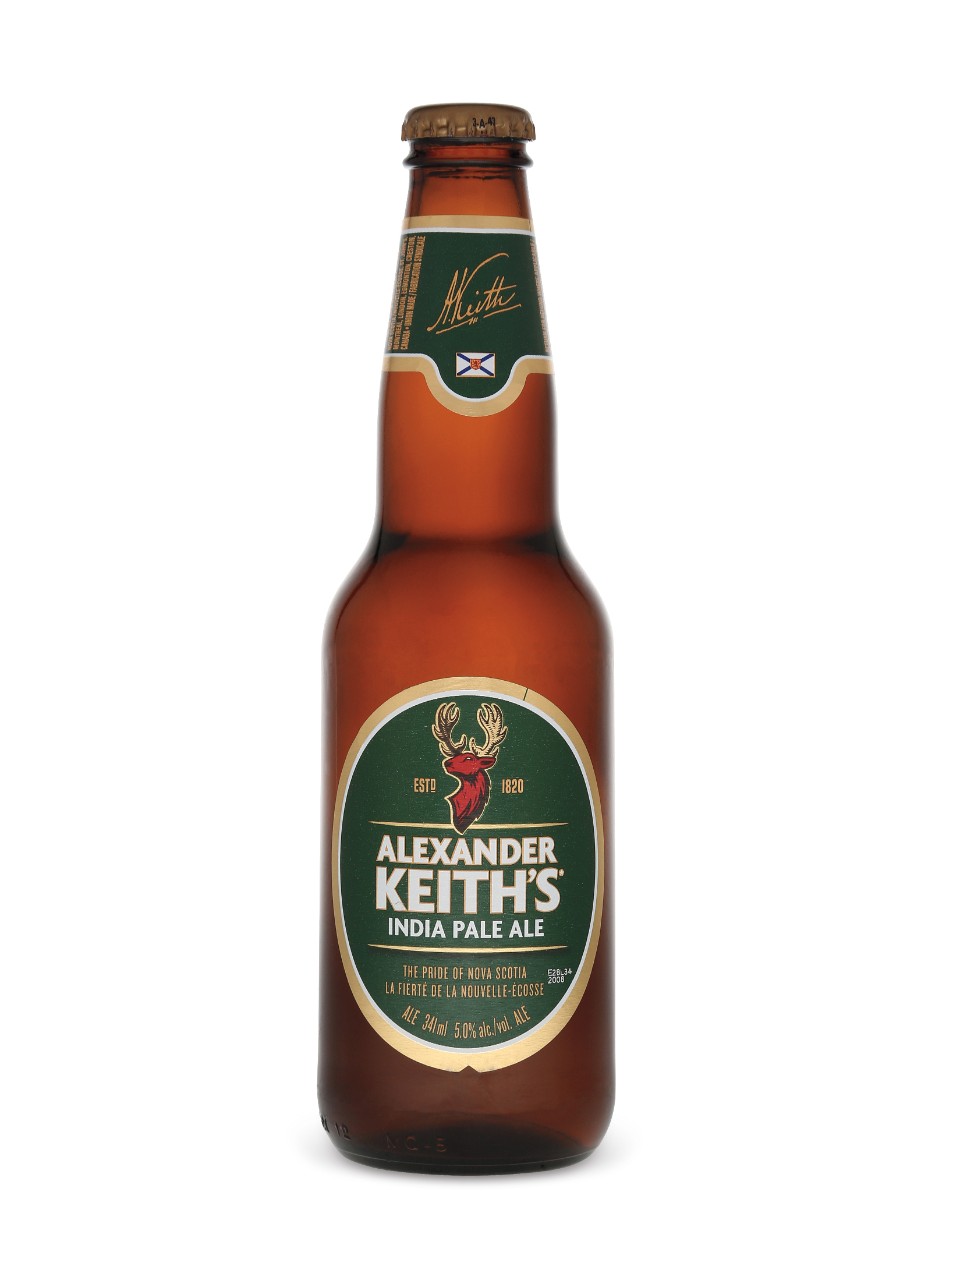 Alexander Keith's India Pale Ale